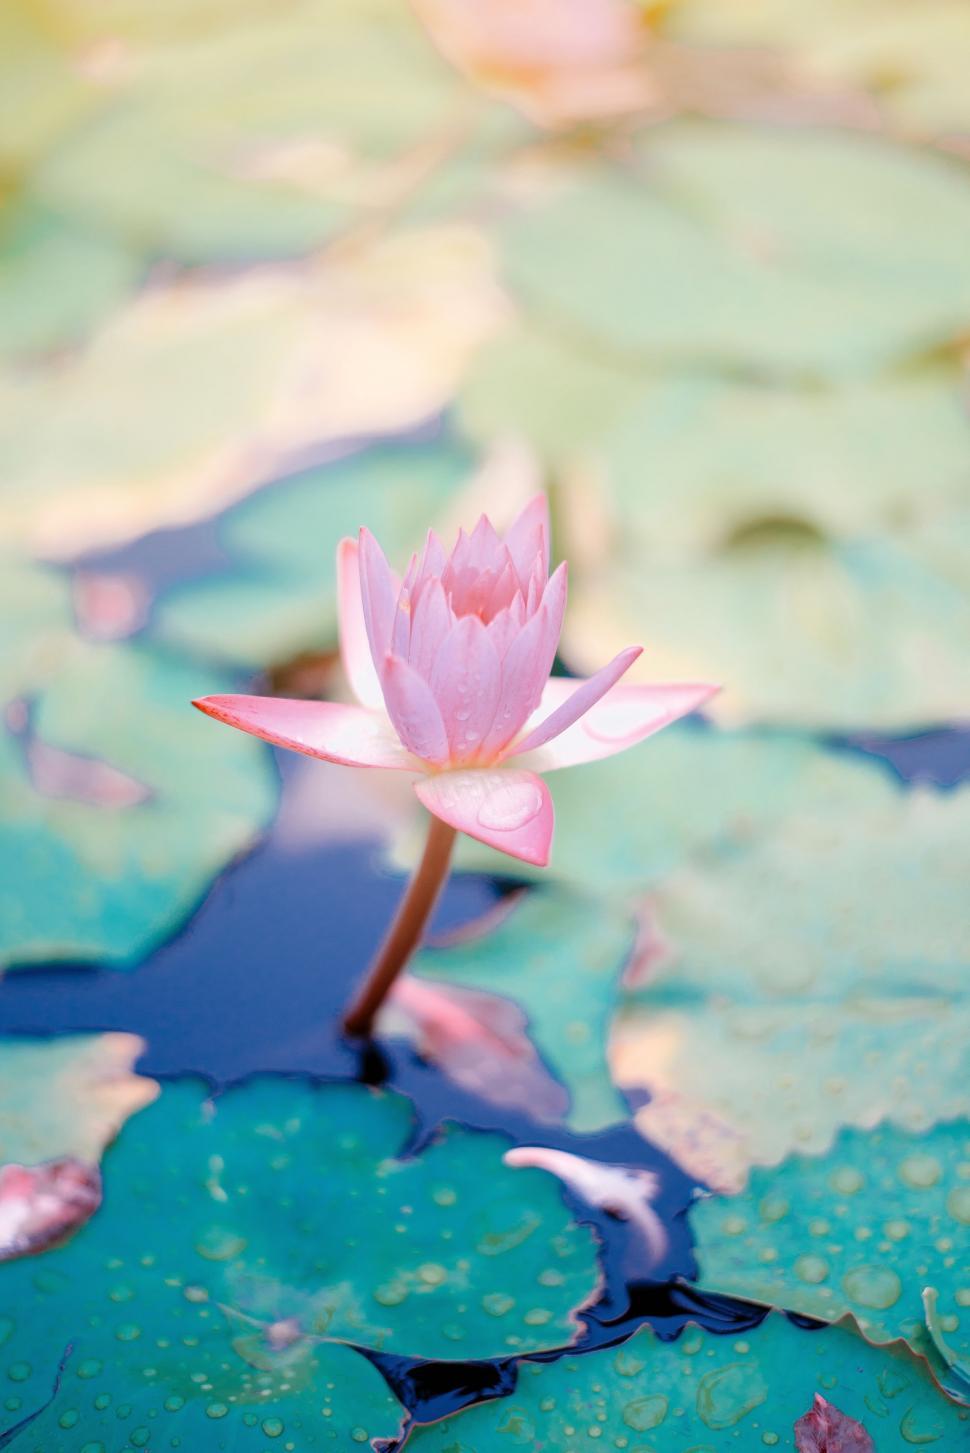 Free Image of Pink Water Lily on Green Lily Pad 